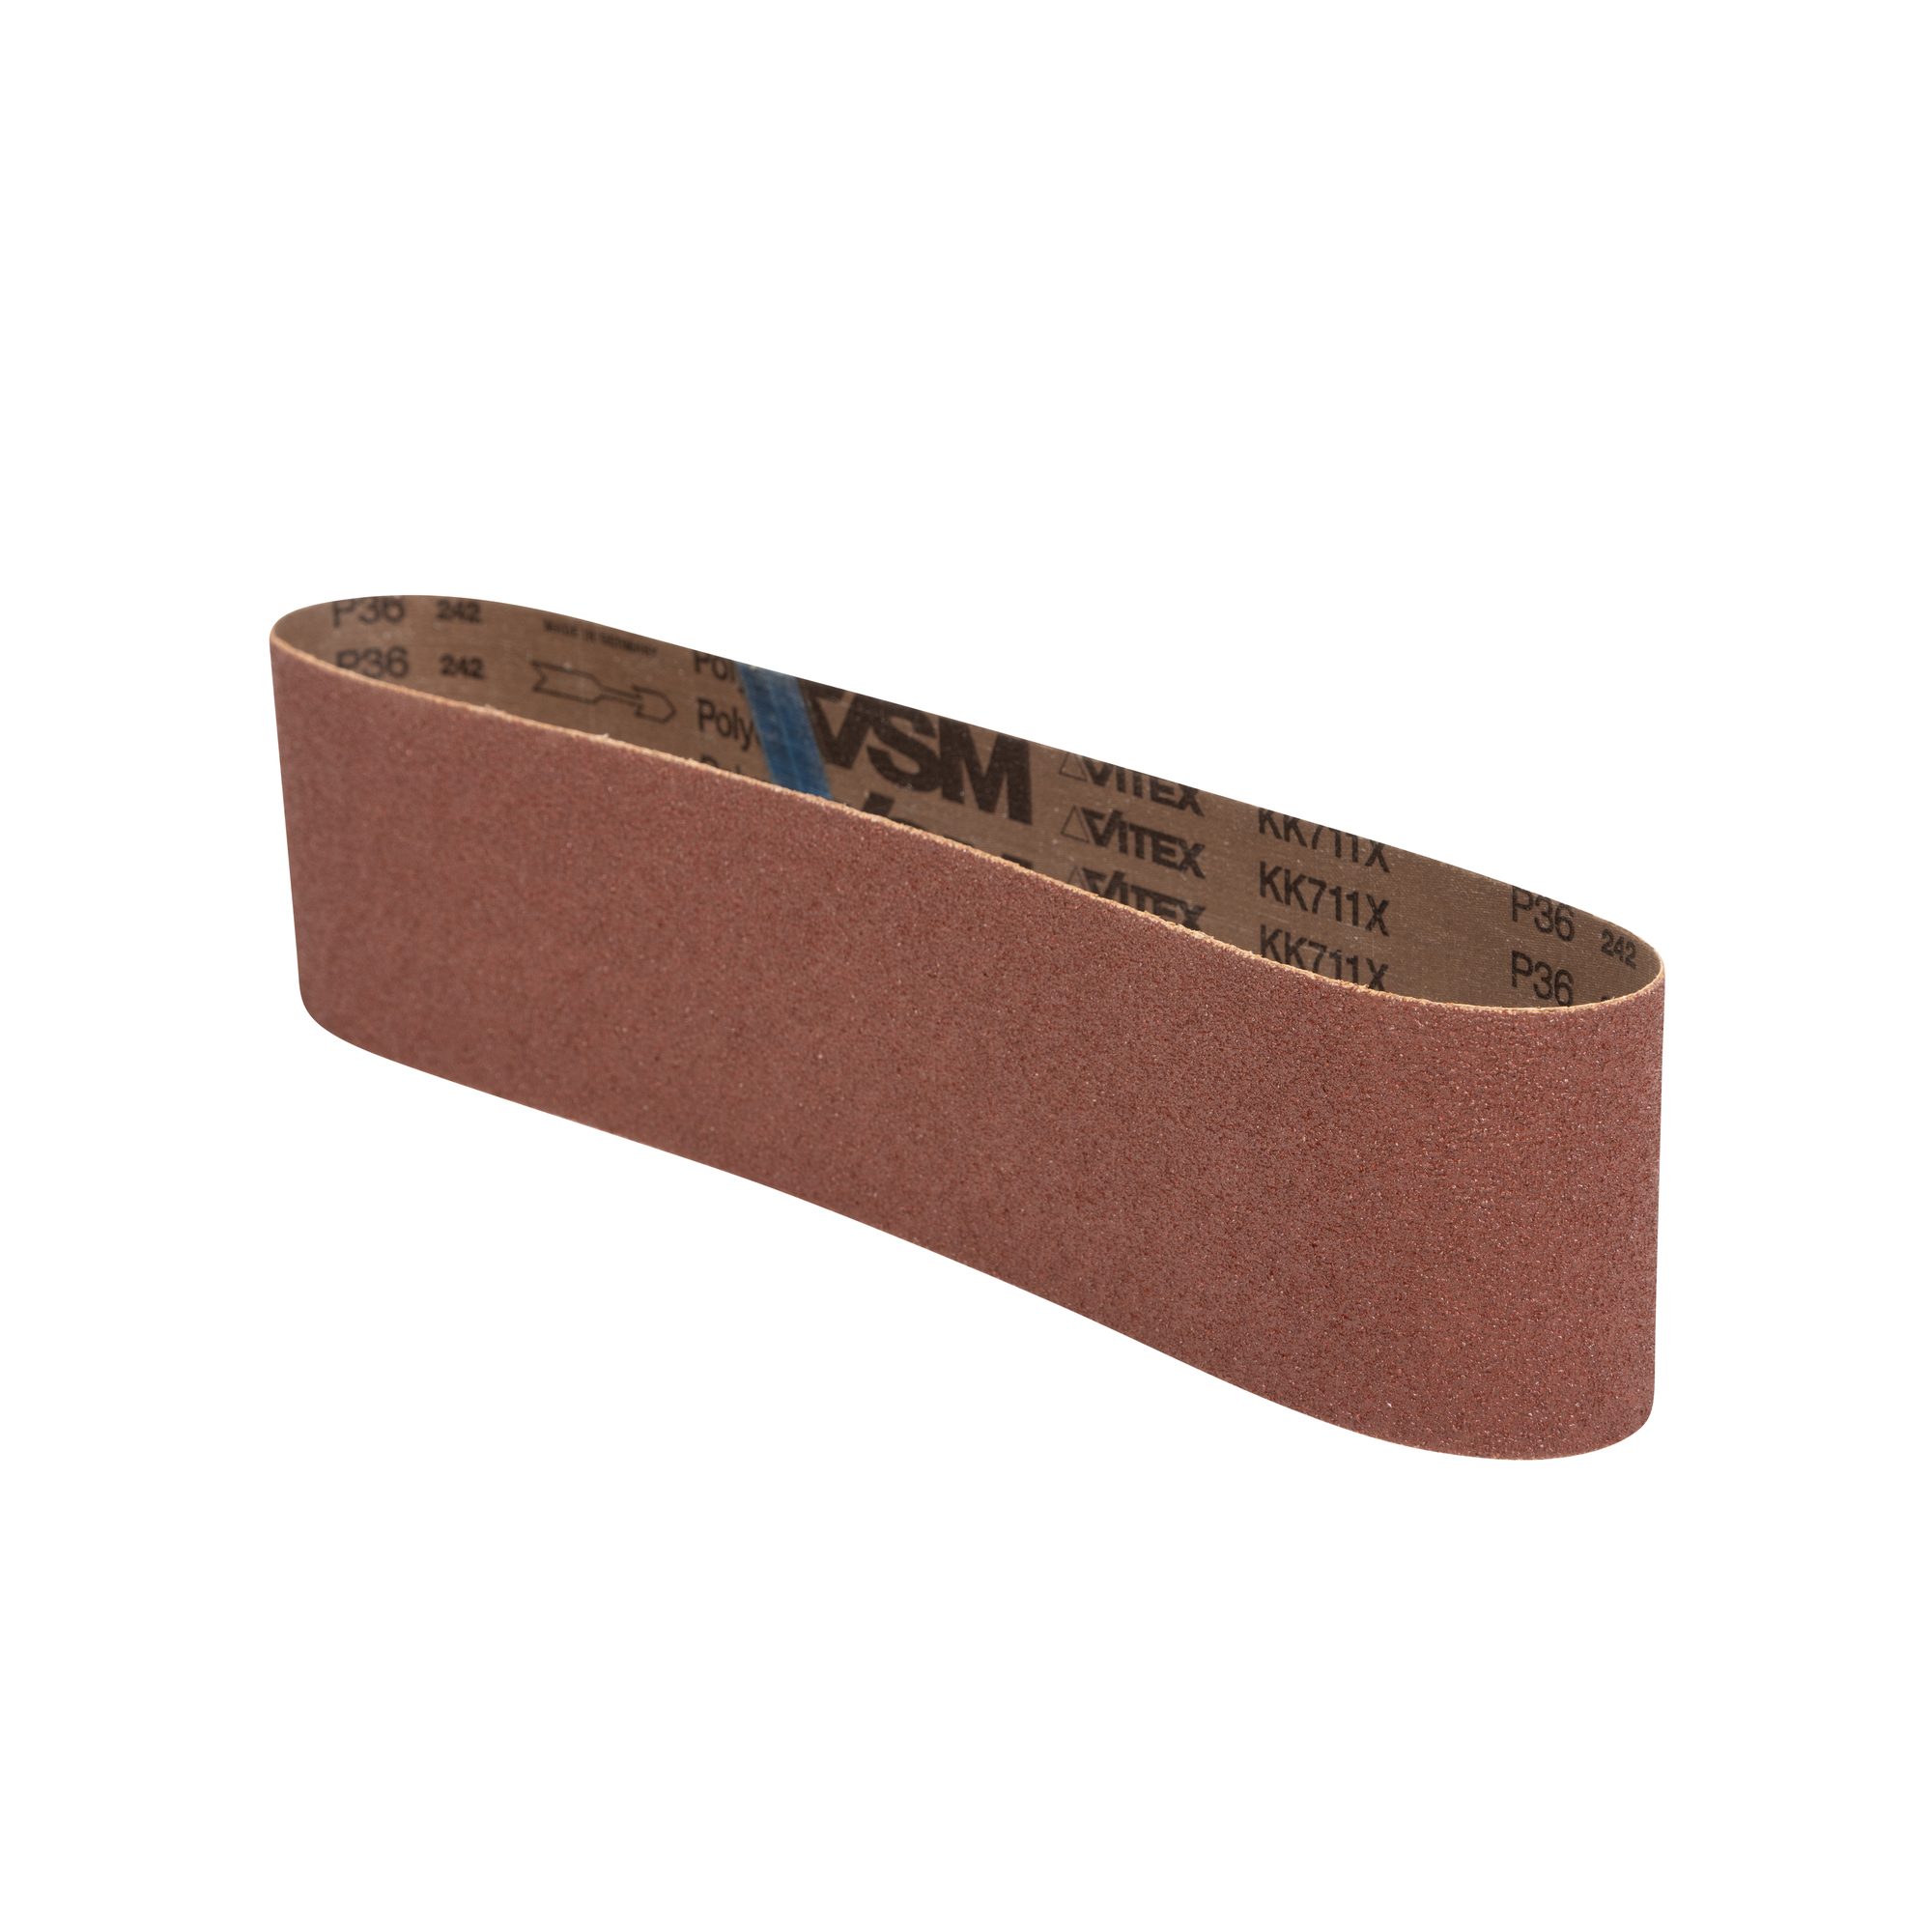 JET, Sand Paper, Pieces (qty.) 3 Grit 120 Length 36 in, Model 577536